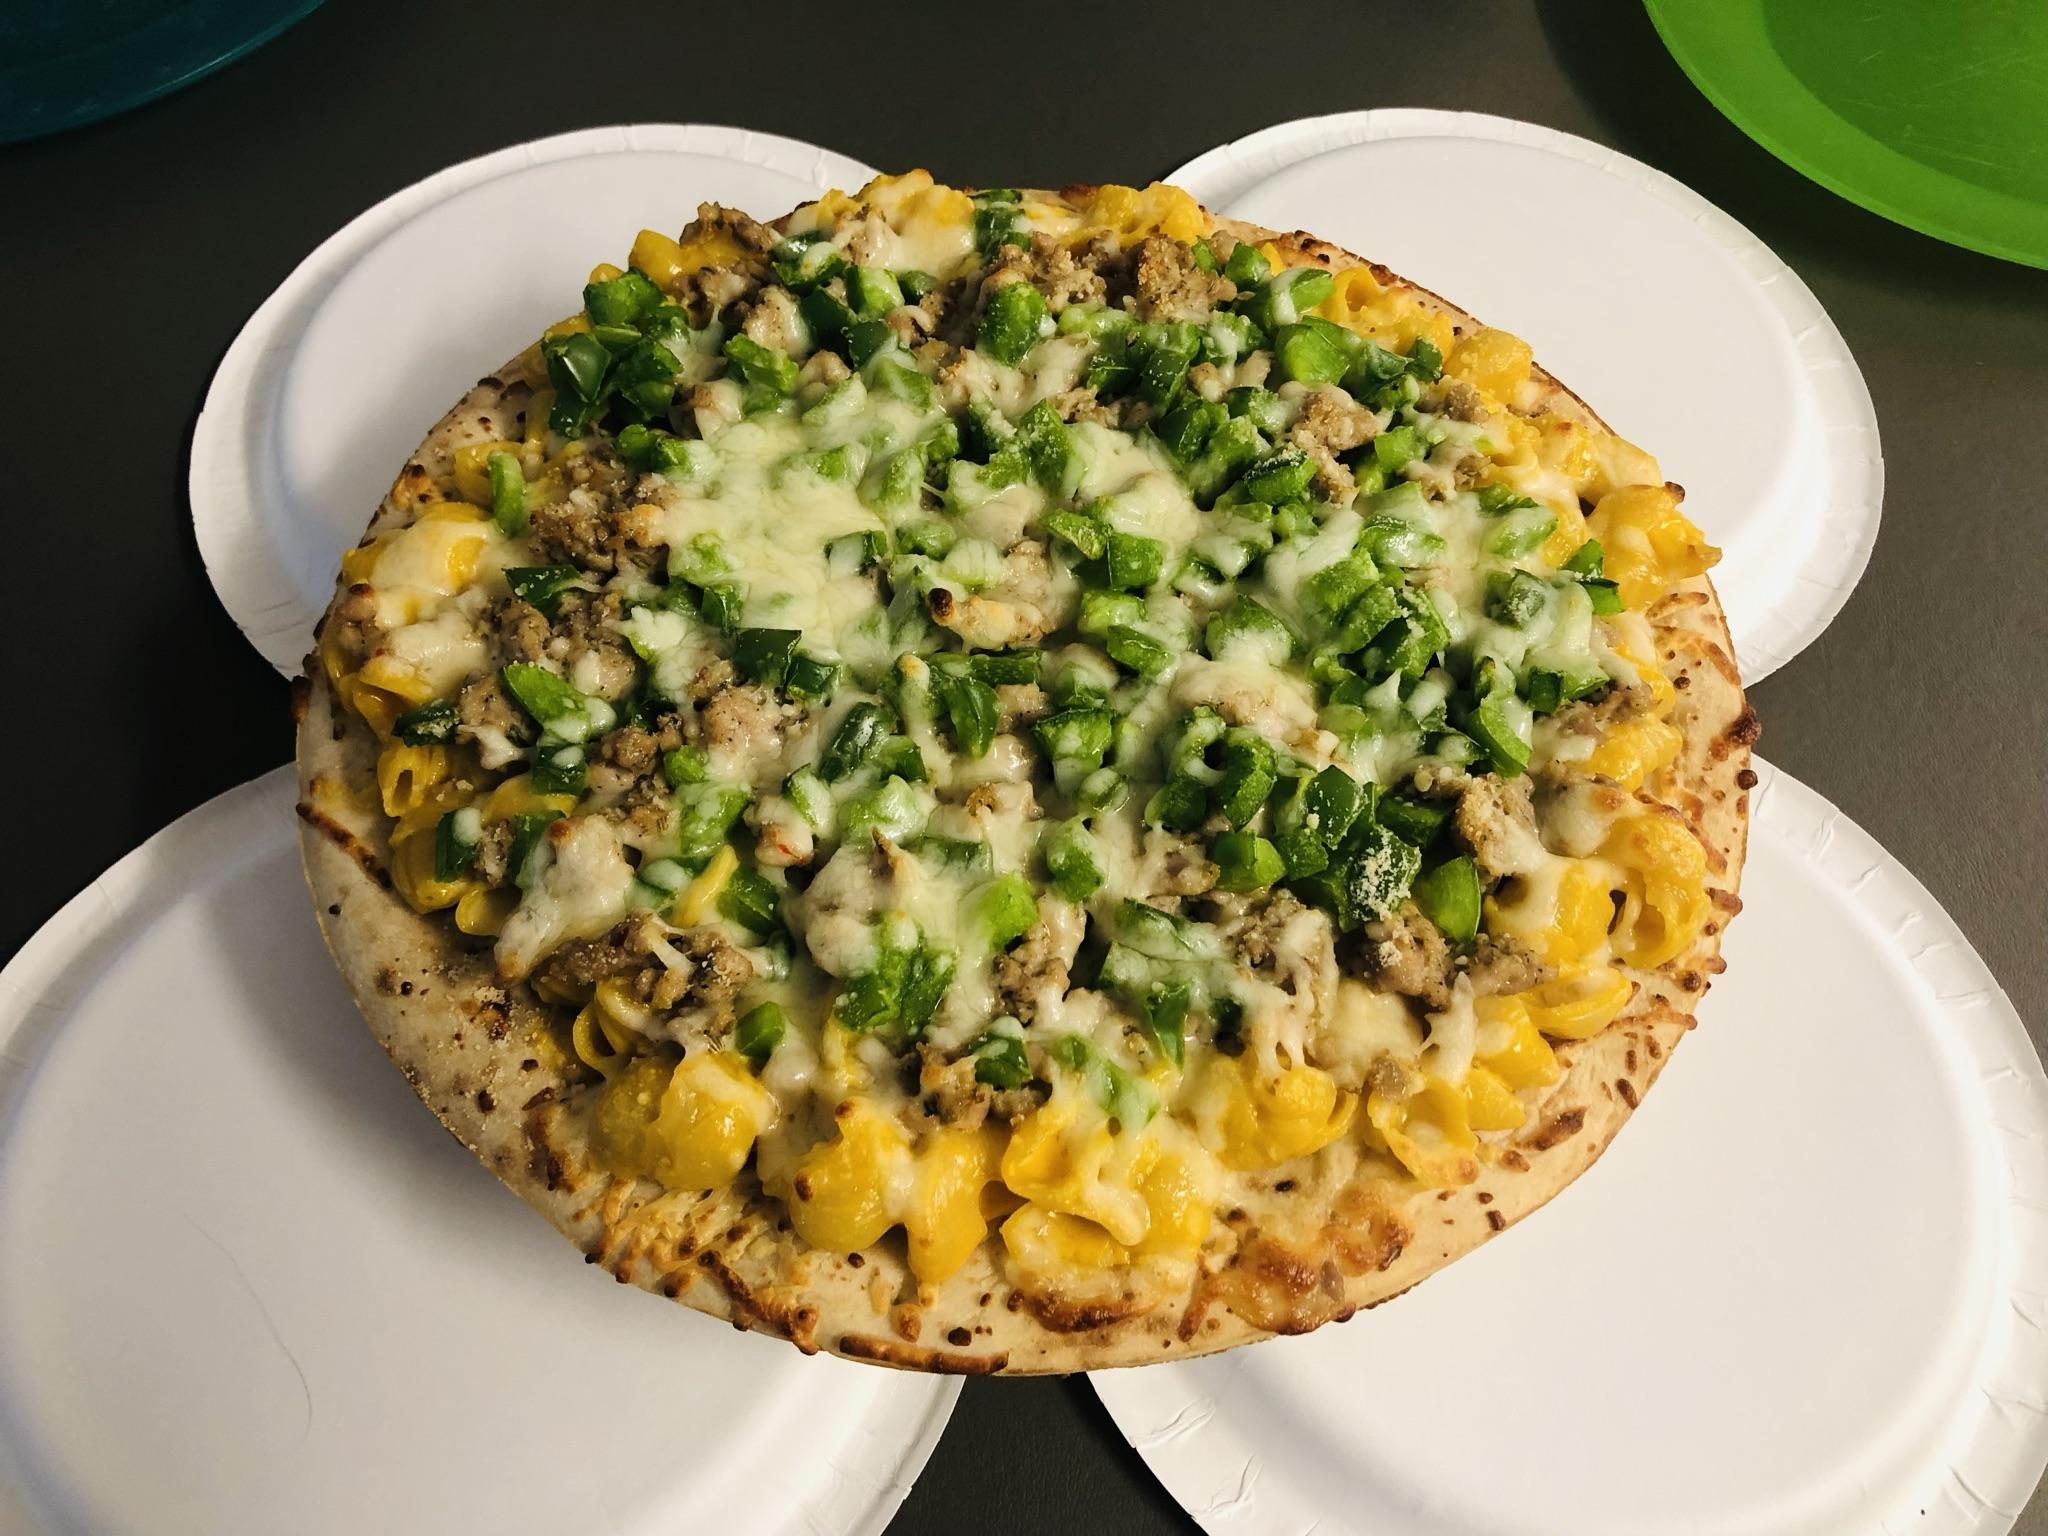 A Monstrous, College-Budget Macaroni Pizza